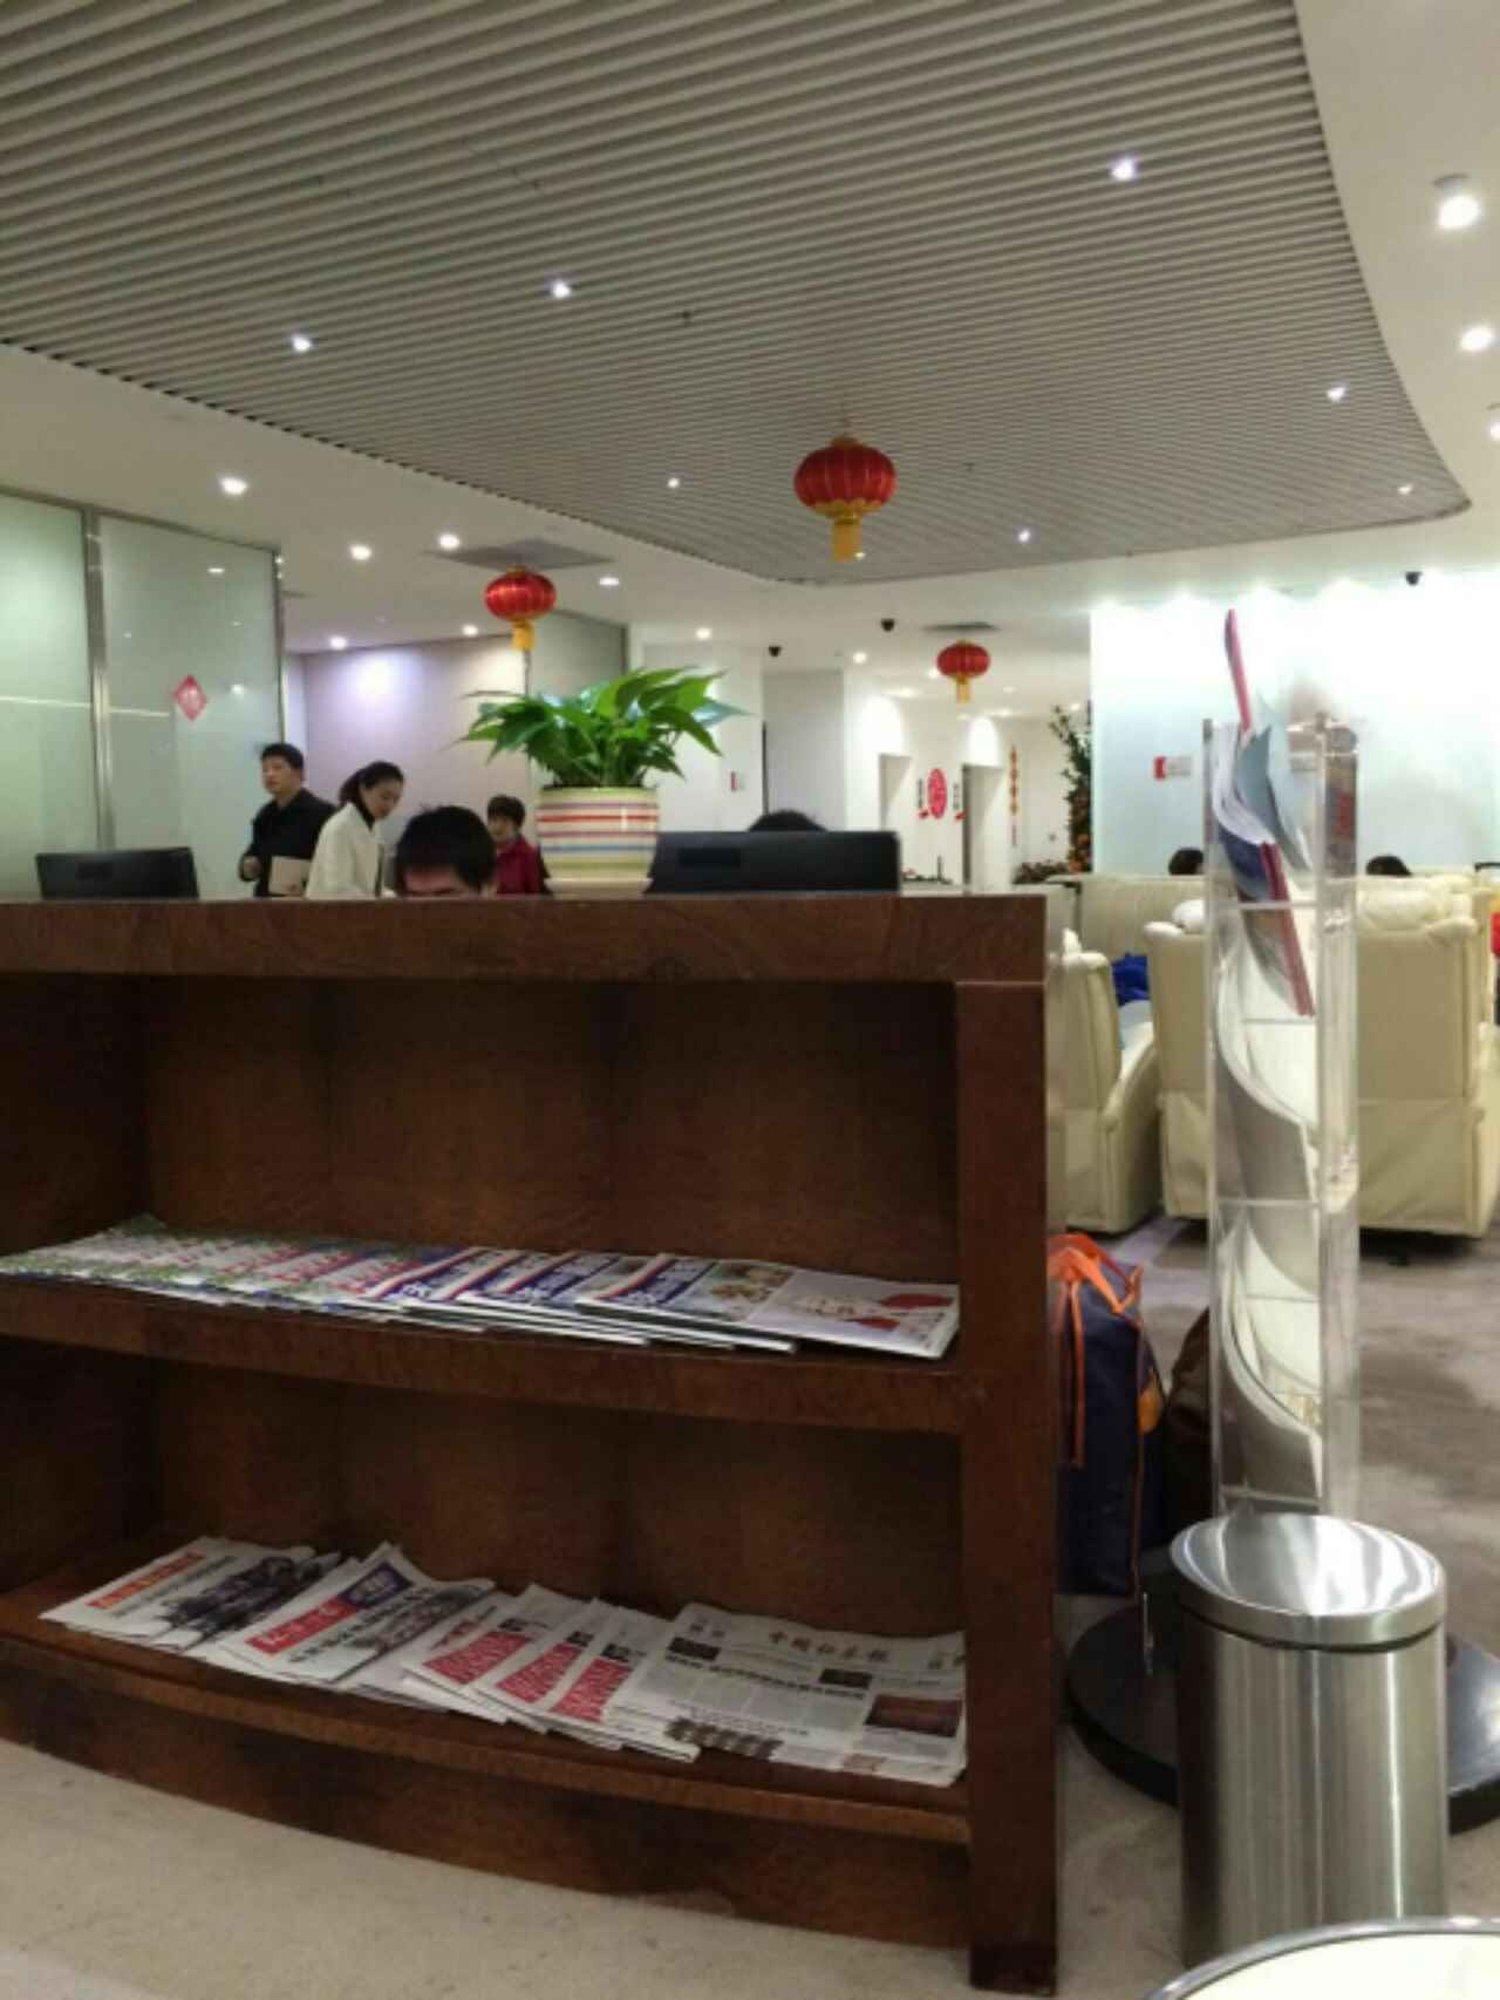 China Southern First/Business Lounge V2 image 4 of 8